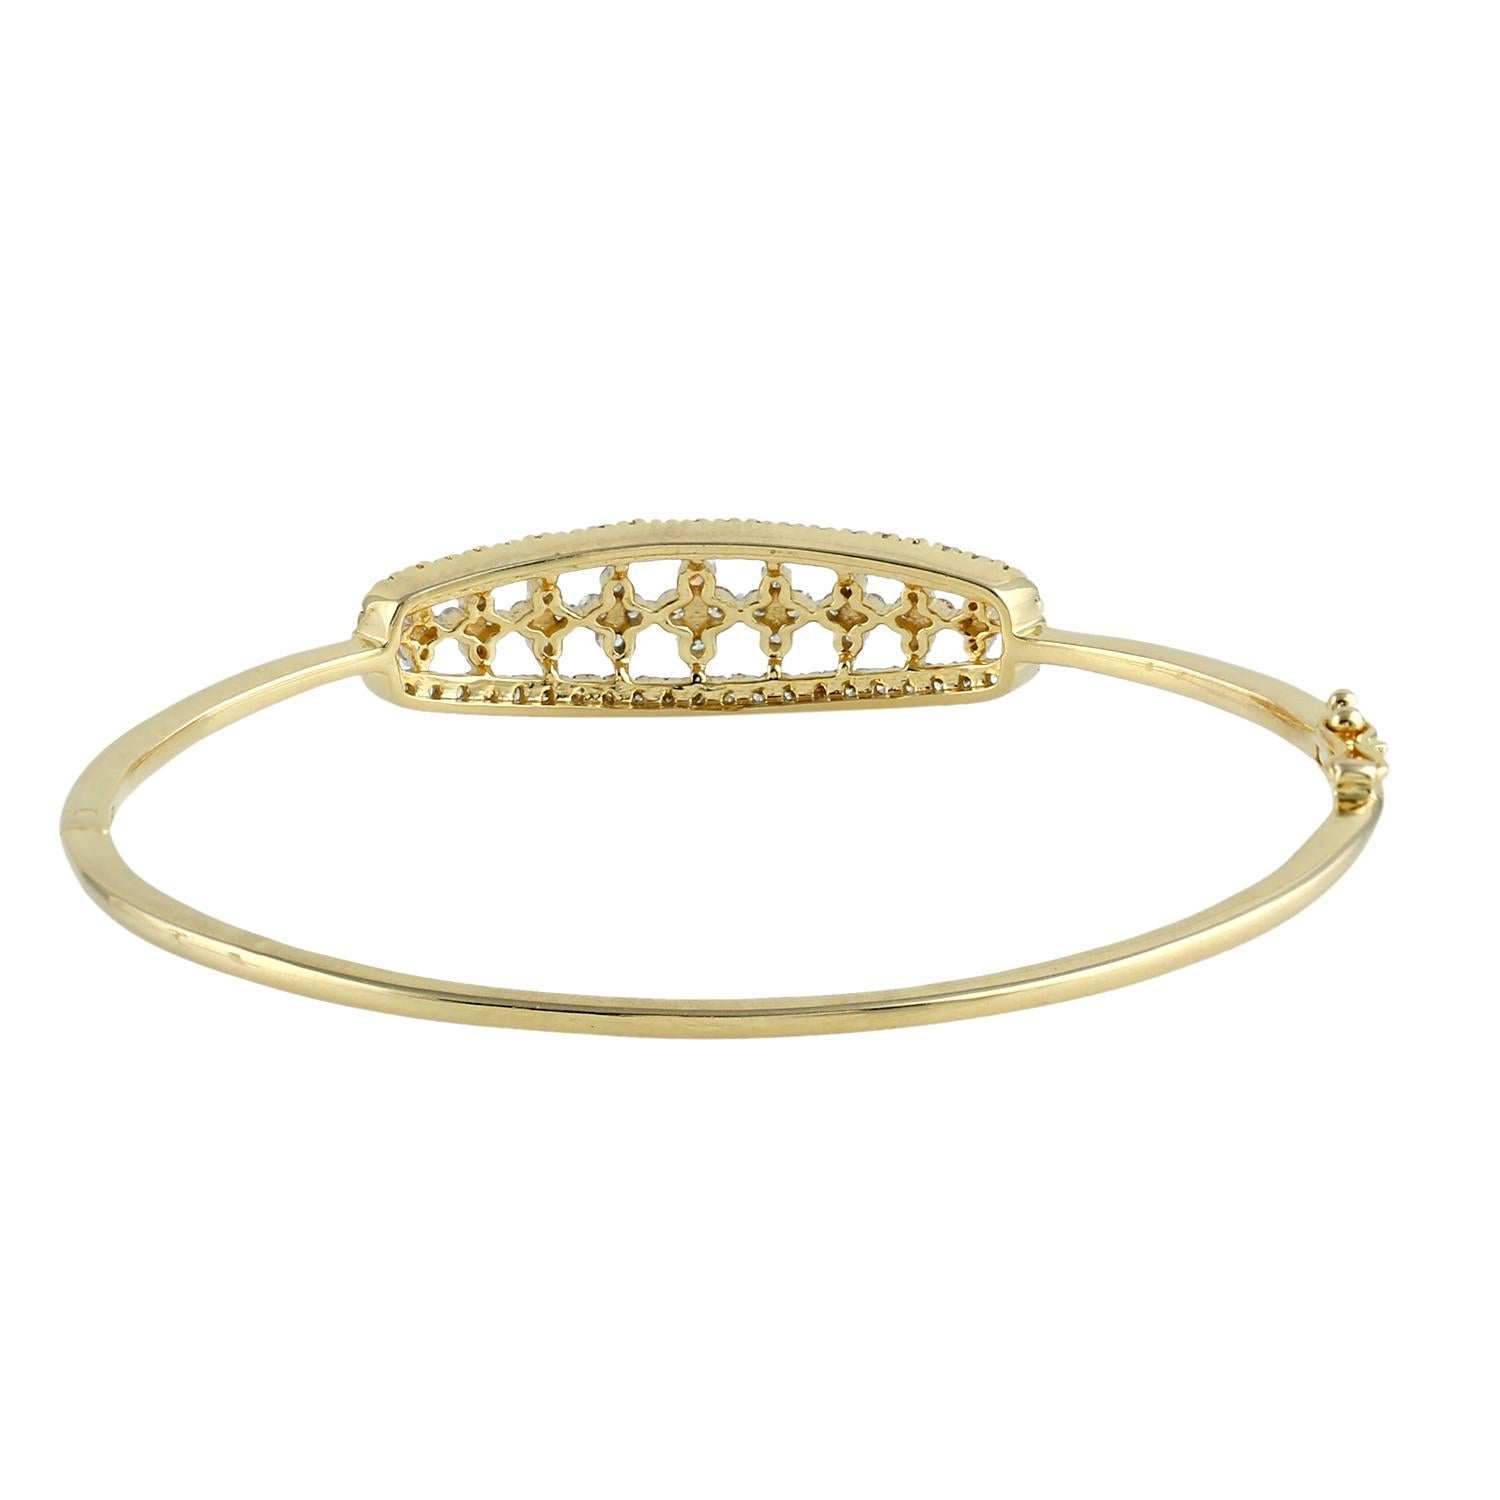 Everyday wearable designer diamond oval shape bangle in 18K Yellow Gold is just lovely.

18K Gold: 10.415gms
Diamond: .96cts
